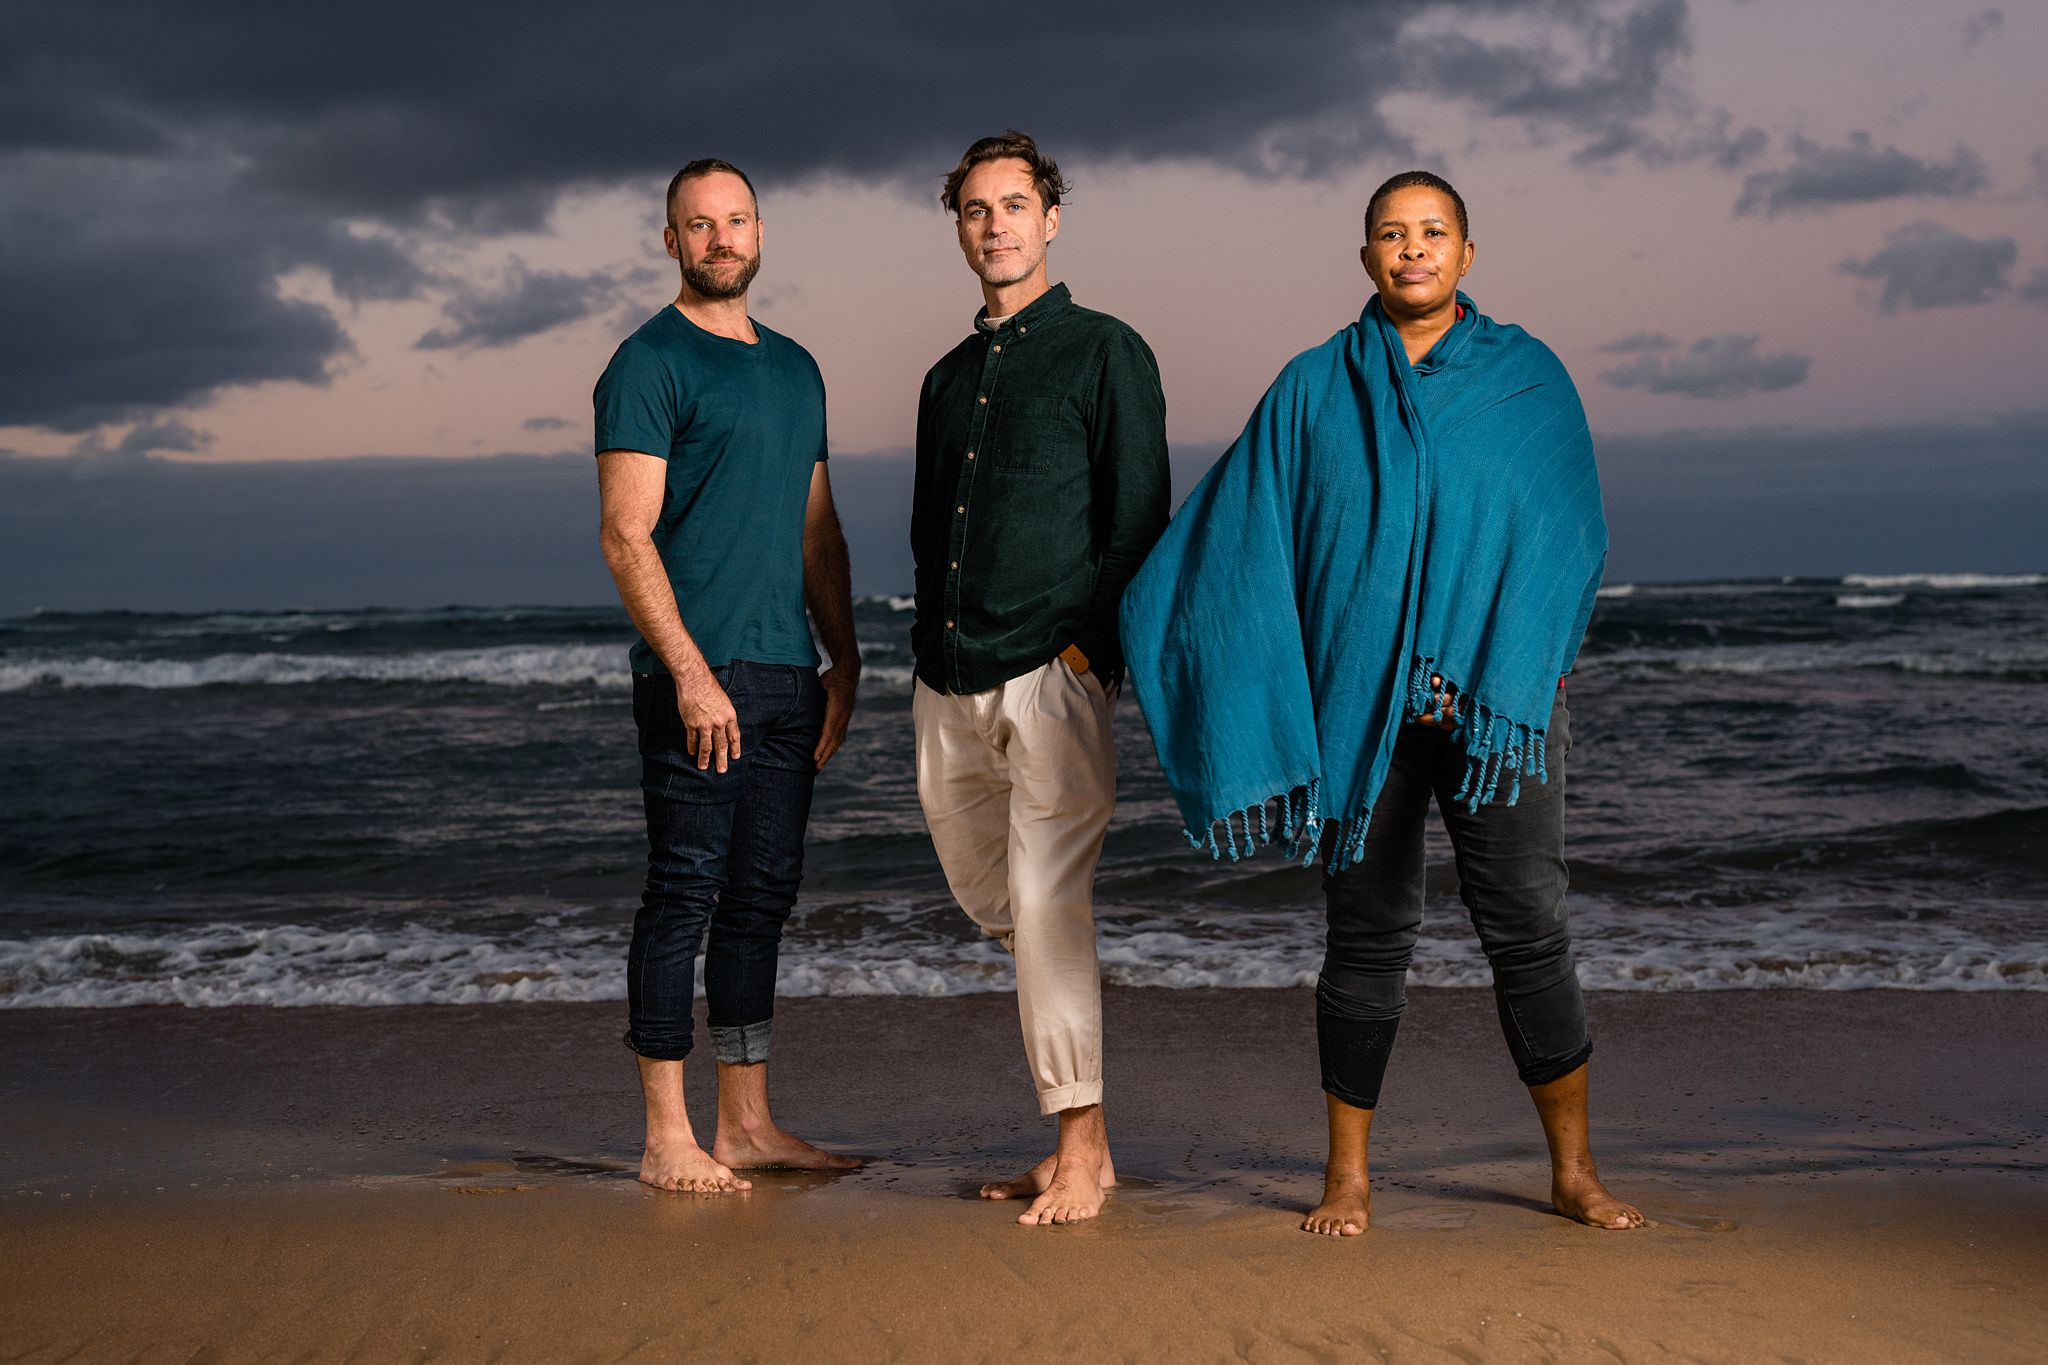 Neil Coppen, Dylan McGarry and Mpume Mthombeni, the co founders of Empatheatre. Image: Jacki Bruniquel